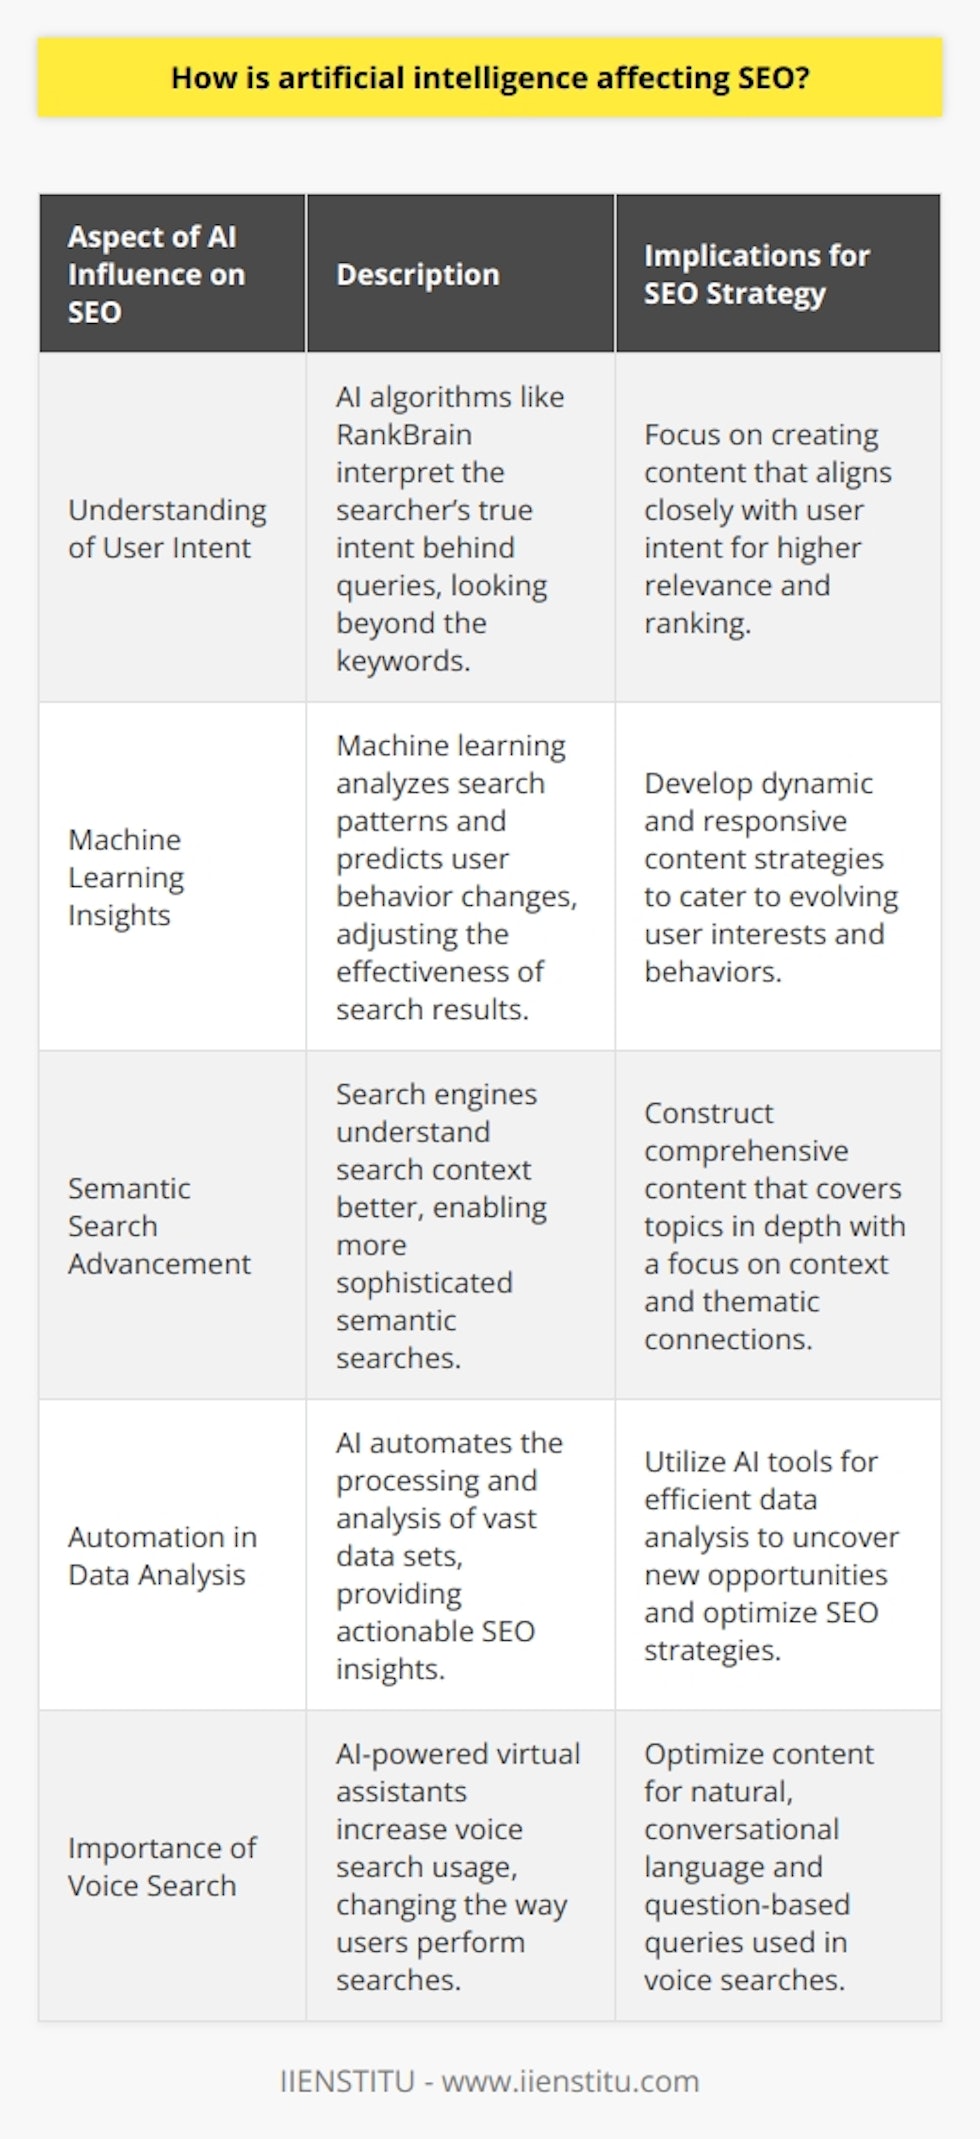 Artificial Intelligence (AI) has revolutionized the way search engines operate and, consequently, how SEO strategies are developed and implemented. Here's an in-depth look at the varying aspects of AI's influence on SEO:Enhanced Understanding of User IntentAI-powered algorithms, like Google's RankBrain, have a profound impact on the interpretation of user queries. RankBrain, in particular, uses AI to analyze the meaning behind search phrases, focusing beyond the keywords to grasp the searcher's actual intent. This shift towards intent-based search is crucial for SEO strategists, as ensuring relevance between user intent and content becomes paramount for higher rankings. Websites need to provide answers and solutions that precisely match the search queries' intent to stay relevant.The Proliferation of Machine LearningAI's role in SEO becomes even more significant when machine learning enters the equation. Machine learning algorithms continuously analyze user behavior, search patterns, and the effectiveness of different search results. By understanding trends, machine learning can often predict shifts in user behavior, which means SEO strategies must be dynamic and responsive to stay ahead of the curve. Keeping content up to date and relevant to user interests is critical for retaining high search rankings.Advancement of Semantic SearchSemantic search takes the spotlight in an AI-driven SEO landscape. AI enhances the ability of search engines to understand the nuances and context surrounding search phrases, making semantic search more sophisticated. This advancement pushes SEO strategists to prioritize context and thematic connections in their content rather than relying on keyword density alone. Semantic search encourages a comprehensive content strategy that covers topics in depth, using natural language and variations that users might employ in their search queries.Automation for Efficient Data AnalysisAI has also automated many previously labor-intensive SEO tasks, particularly in data analysis. AI can quickly process and analyze large volumes of data from various sources, providing insights into successful SEO strategies. It highlights the potential for new backlink opportunities, tracks keyword performance, and identifies content gaps. By streamlining data analysis, AI enables SEO professionals to focus on strategy and implementation rather than on data gathering and basic interpretation.Rising Importance of Voice SearchThe surge in voice search usage represents another major impact of AI on SEO. As virtual assistants powered by AI become more commonplace, SEO has to adapt to cater to this new mode of searching. This means optimizing for natural language, conversational keywords, and longer phrases typically used in voice searches. Content that aligns well with the informal and question-based nature of voice queries is likely to perform better in voice search rankings.AI's impact on SEO is far-reaching and continuously evolving. It has shifted the focus from traditional keyword-centric strategies to a more intent-focused, contextually aware approach. AI's ability to process and learn from data offers unprecedented opportunities for refining SEO tactics. SEO practitioners must remain agile, constantly learning and adapting to leverage the full potential of AI in optimizing their online presence.